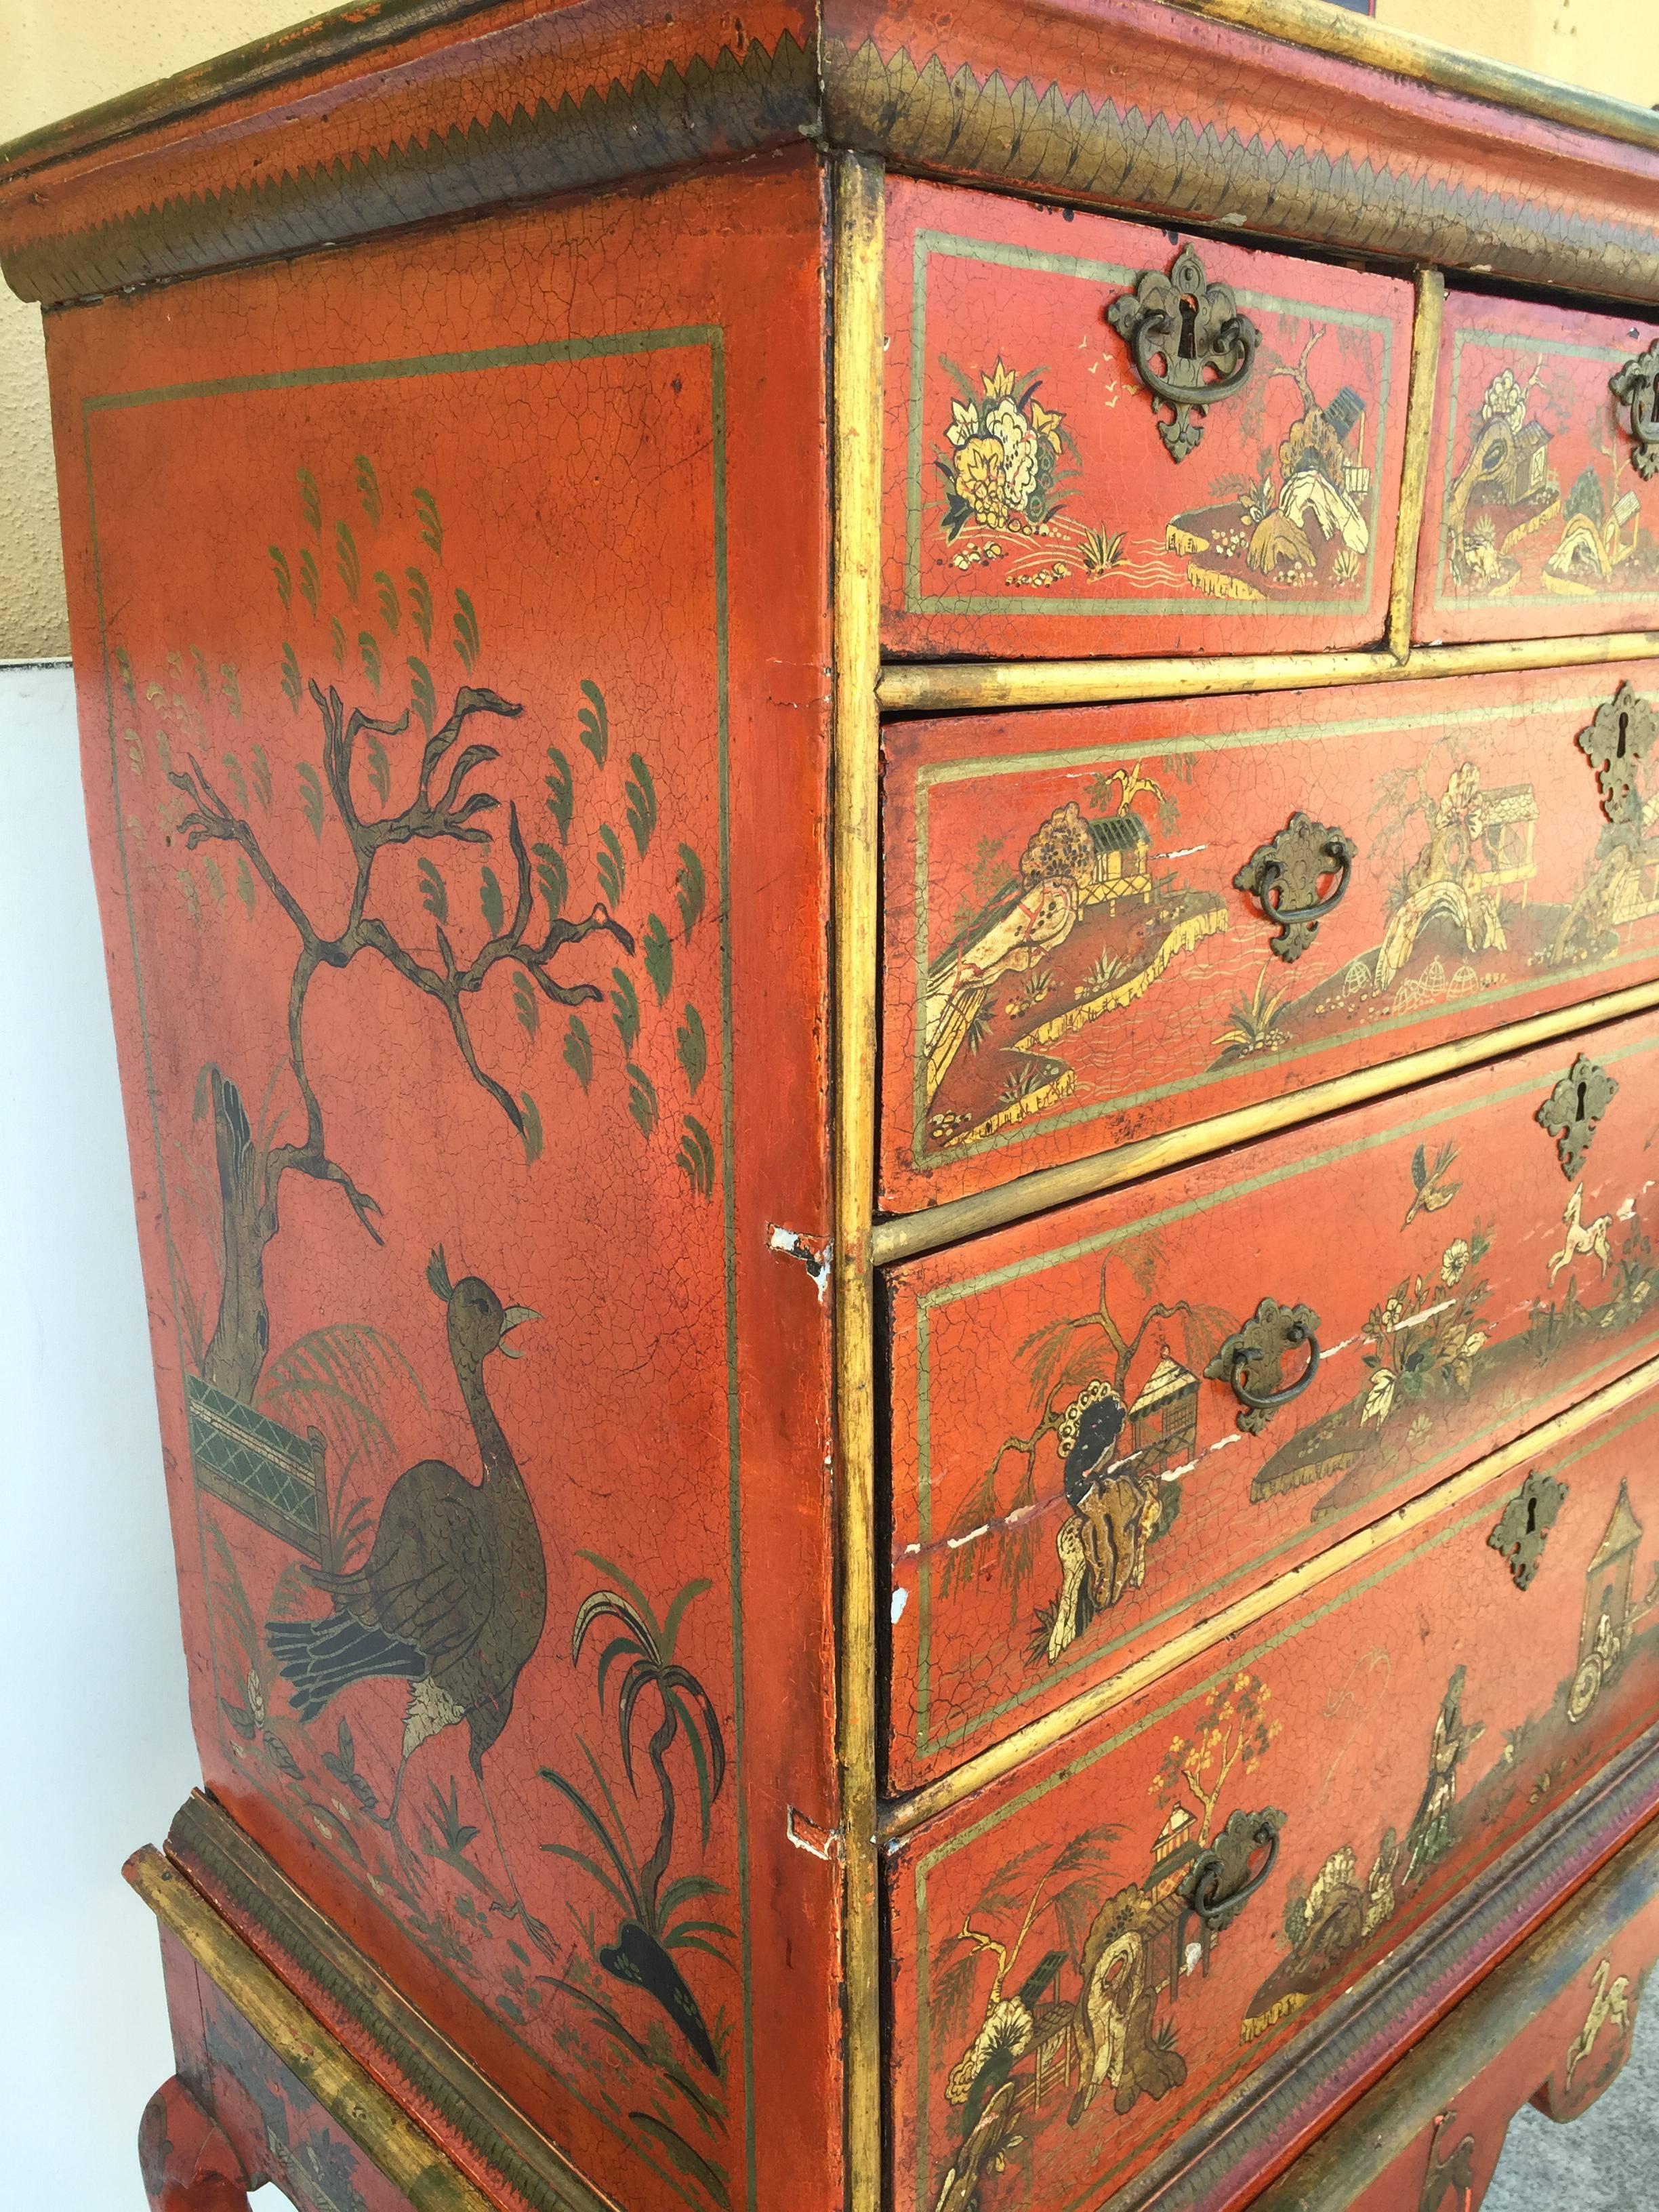 Well proportioned Queen Ann style English chest on stand, japanned in red and gilt. Three drawers over three graduated drawers, resting on finely shaped cabriole legs terminating in a spade foot with scalloped apron, late 18th century.